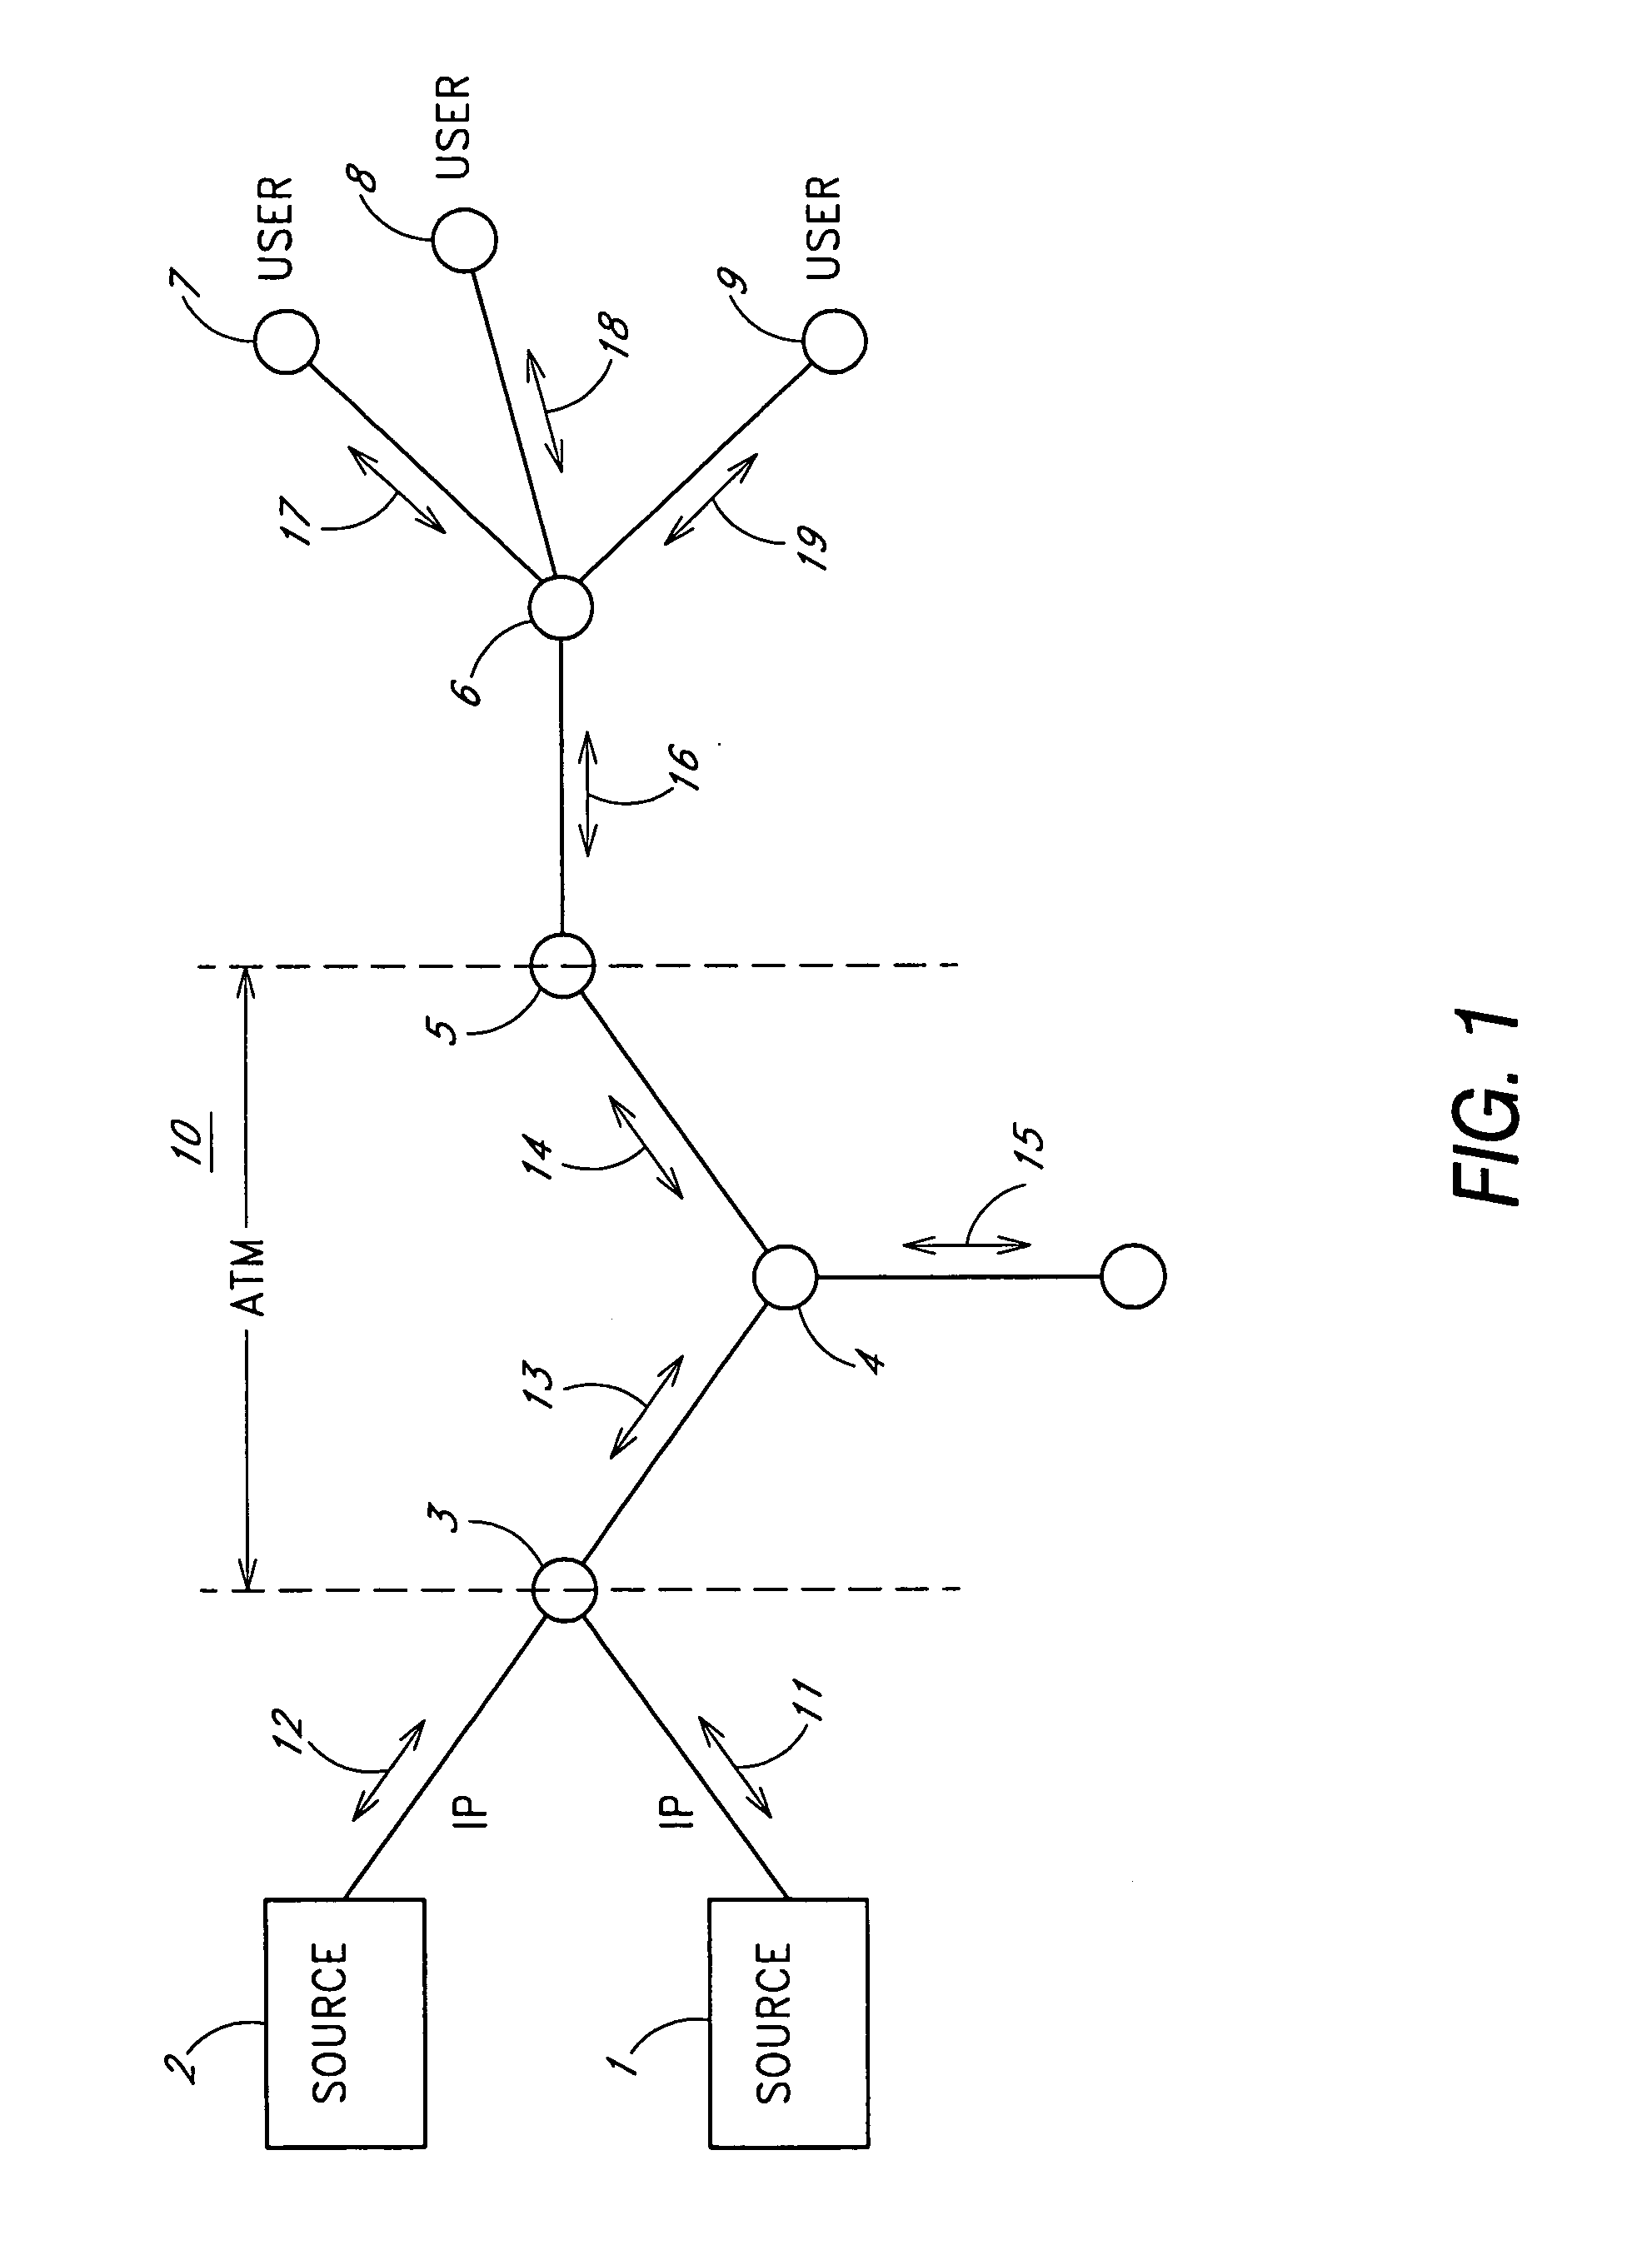 Compression of overhead in layered data communication links